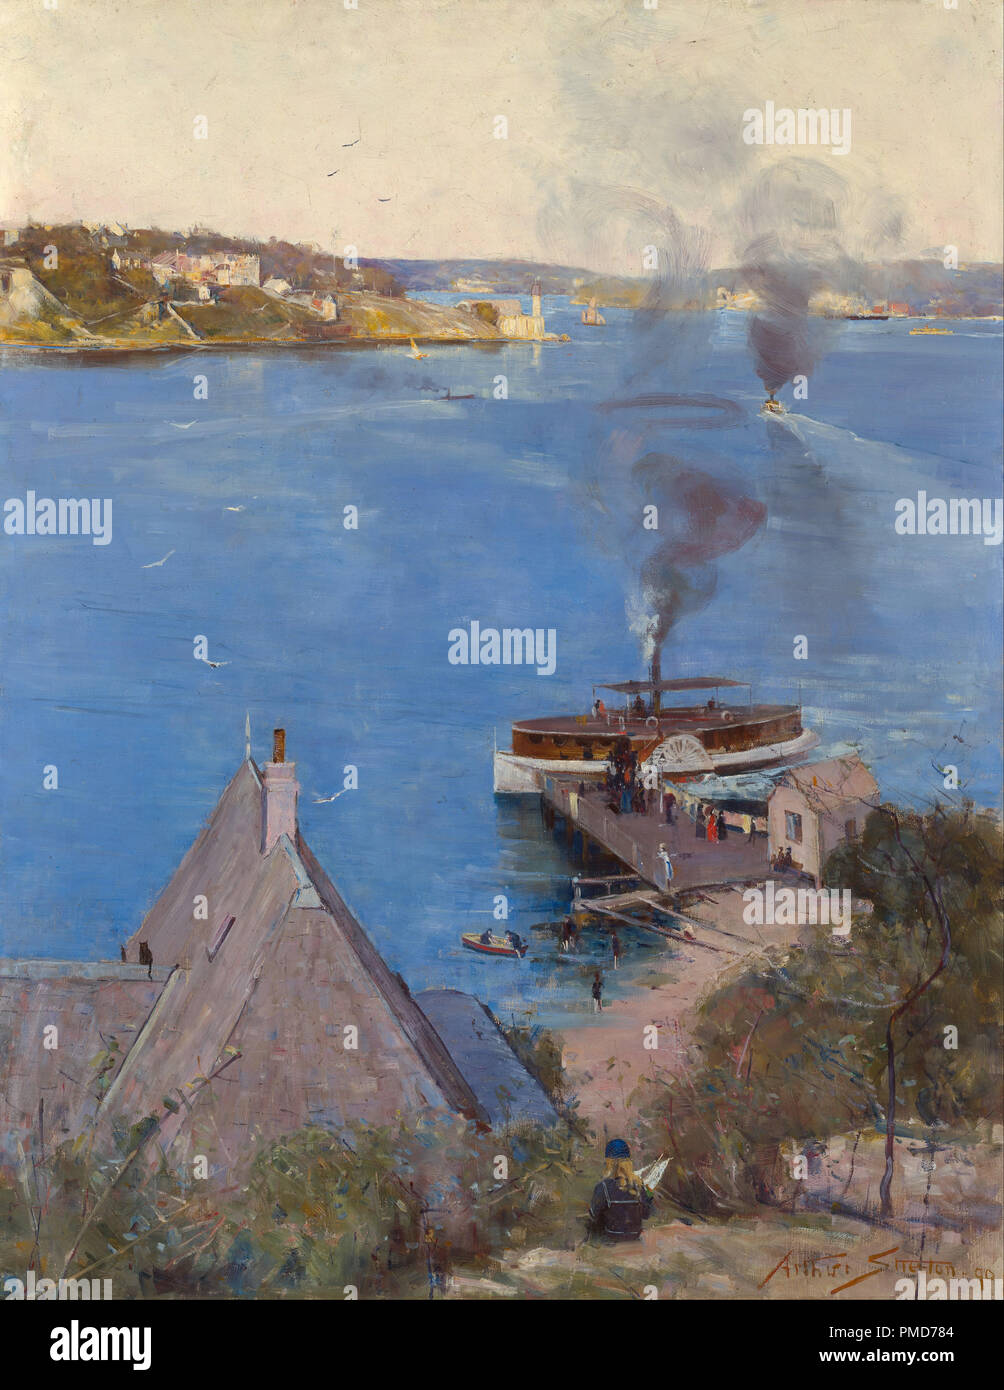 From McMahon's Point - fare one penny. Date/Period: 1890. Painting,oil on canvas. Height: 911 mm (35.86 in); Width: 705 mm (27.75 in). Author: Arthur Streeton. Stock Photo